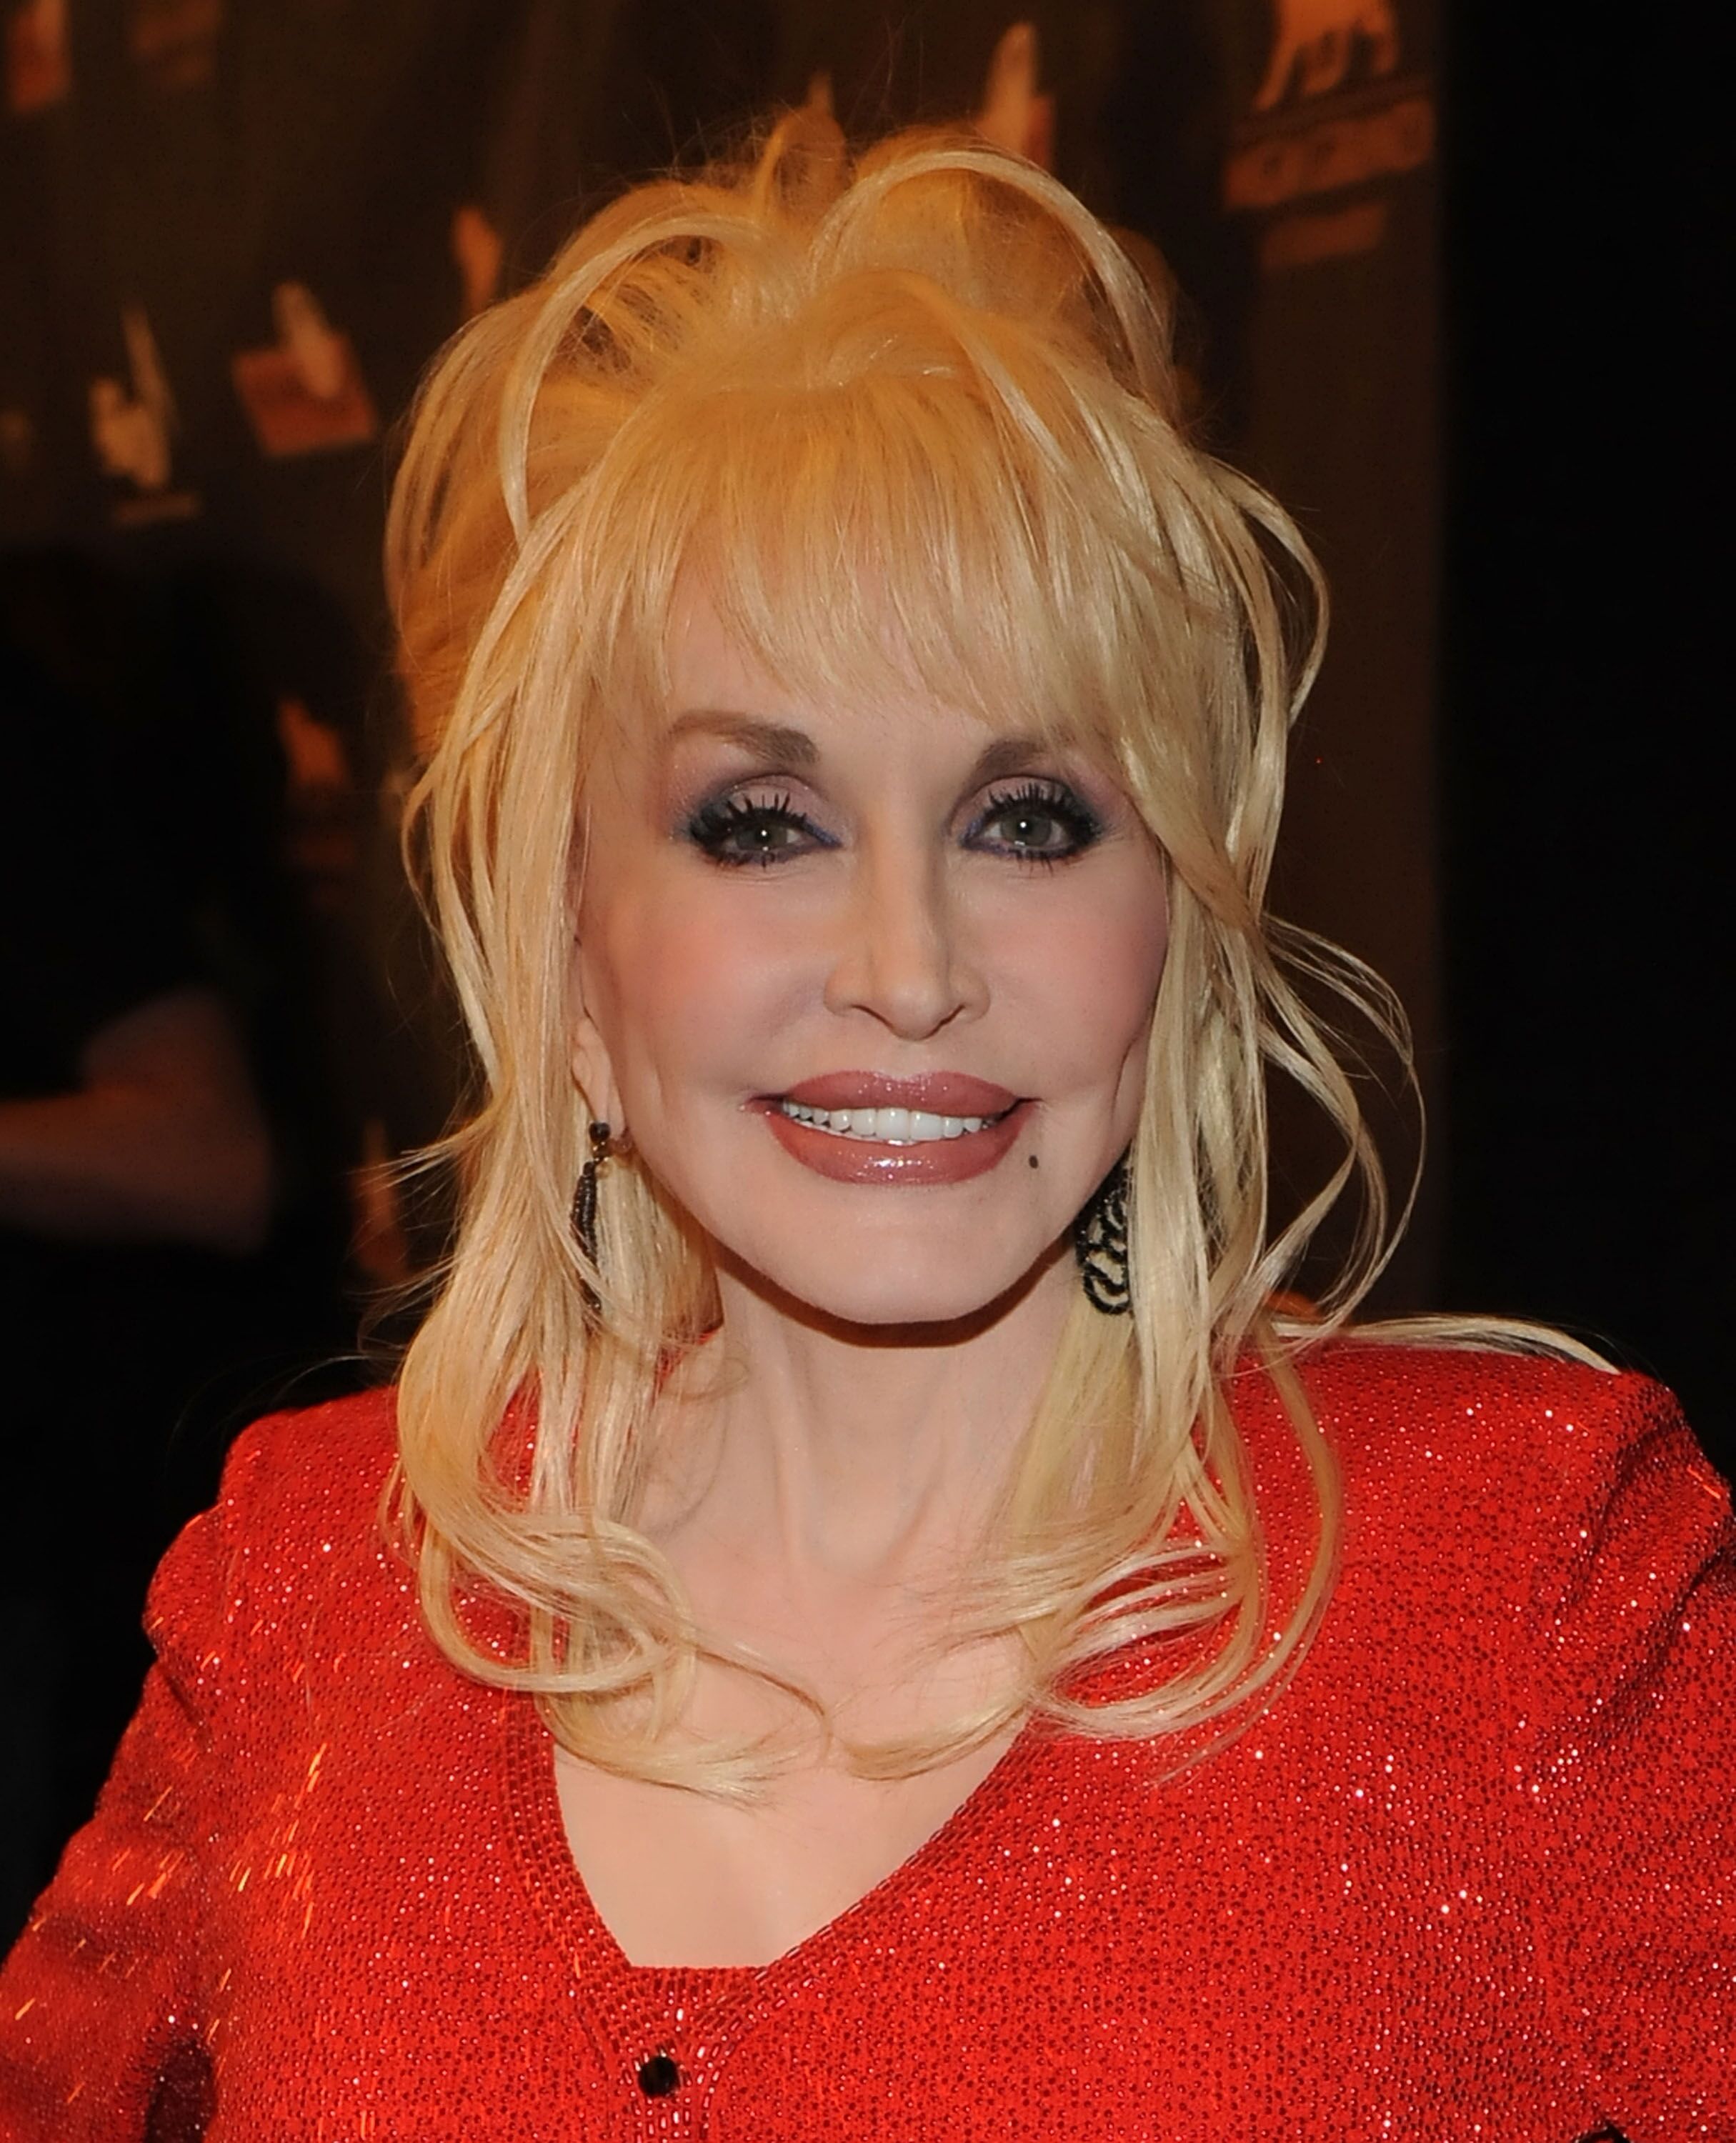 Dolly Parton attends the Kenny Rogers: The First 50 Years award show. | Source: Getty Images